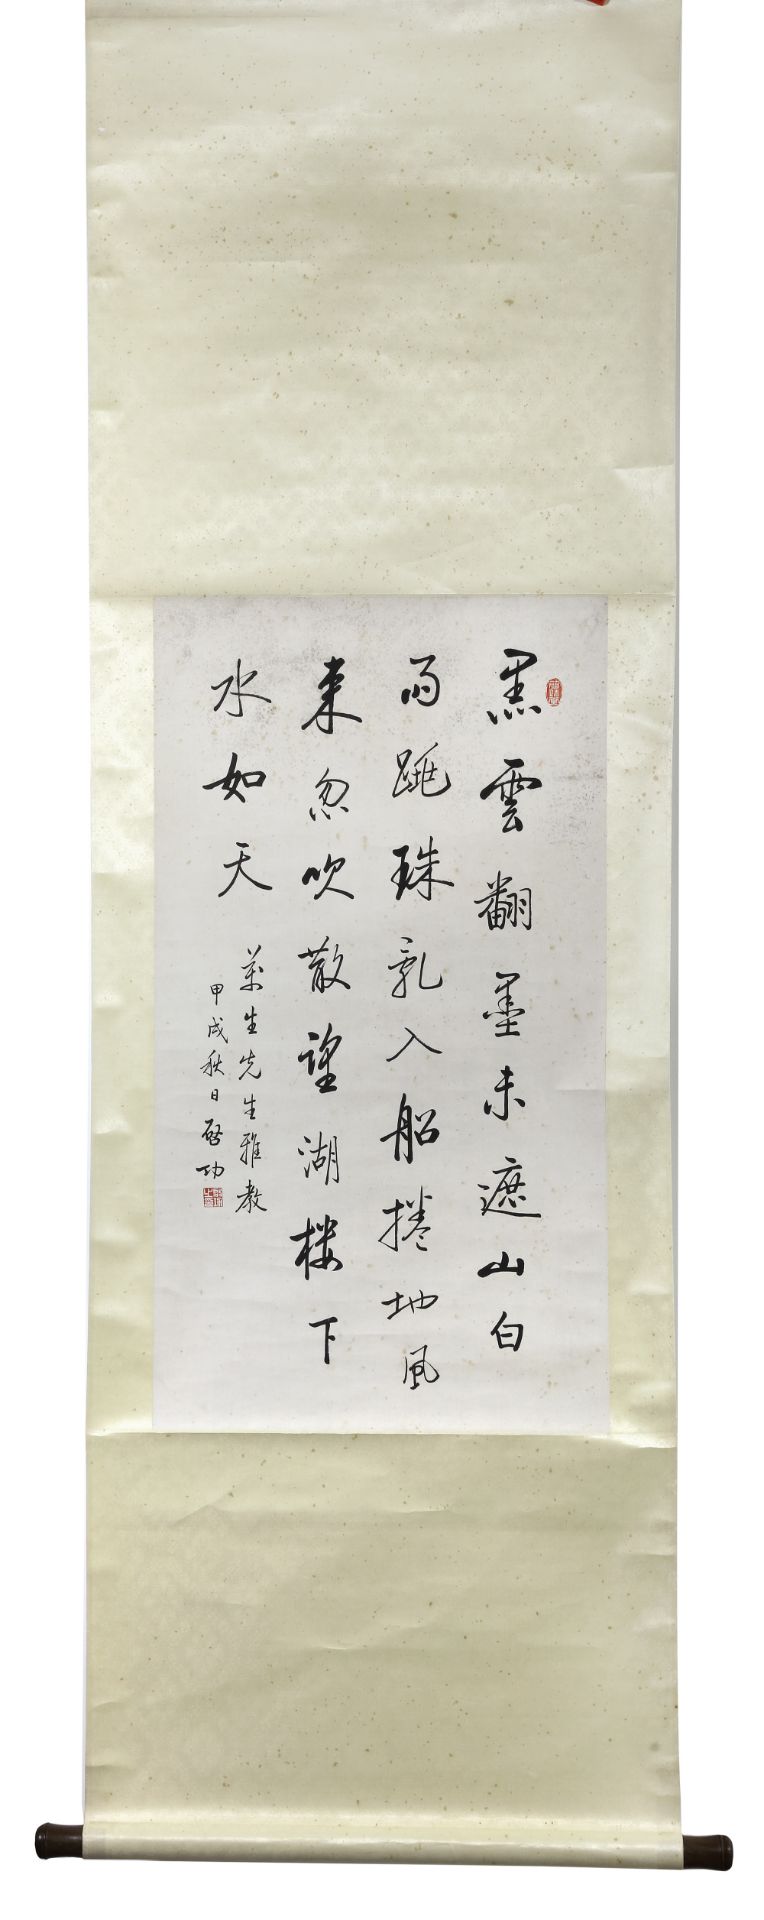 A CHINESE CALLIGRAPHIC SCROLL, QI GONG (1912-2005)